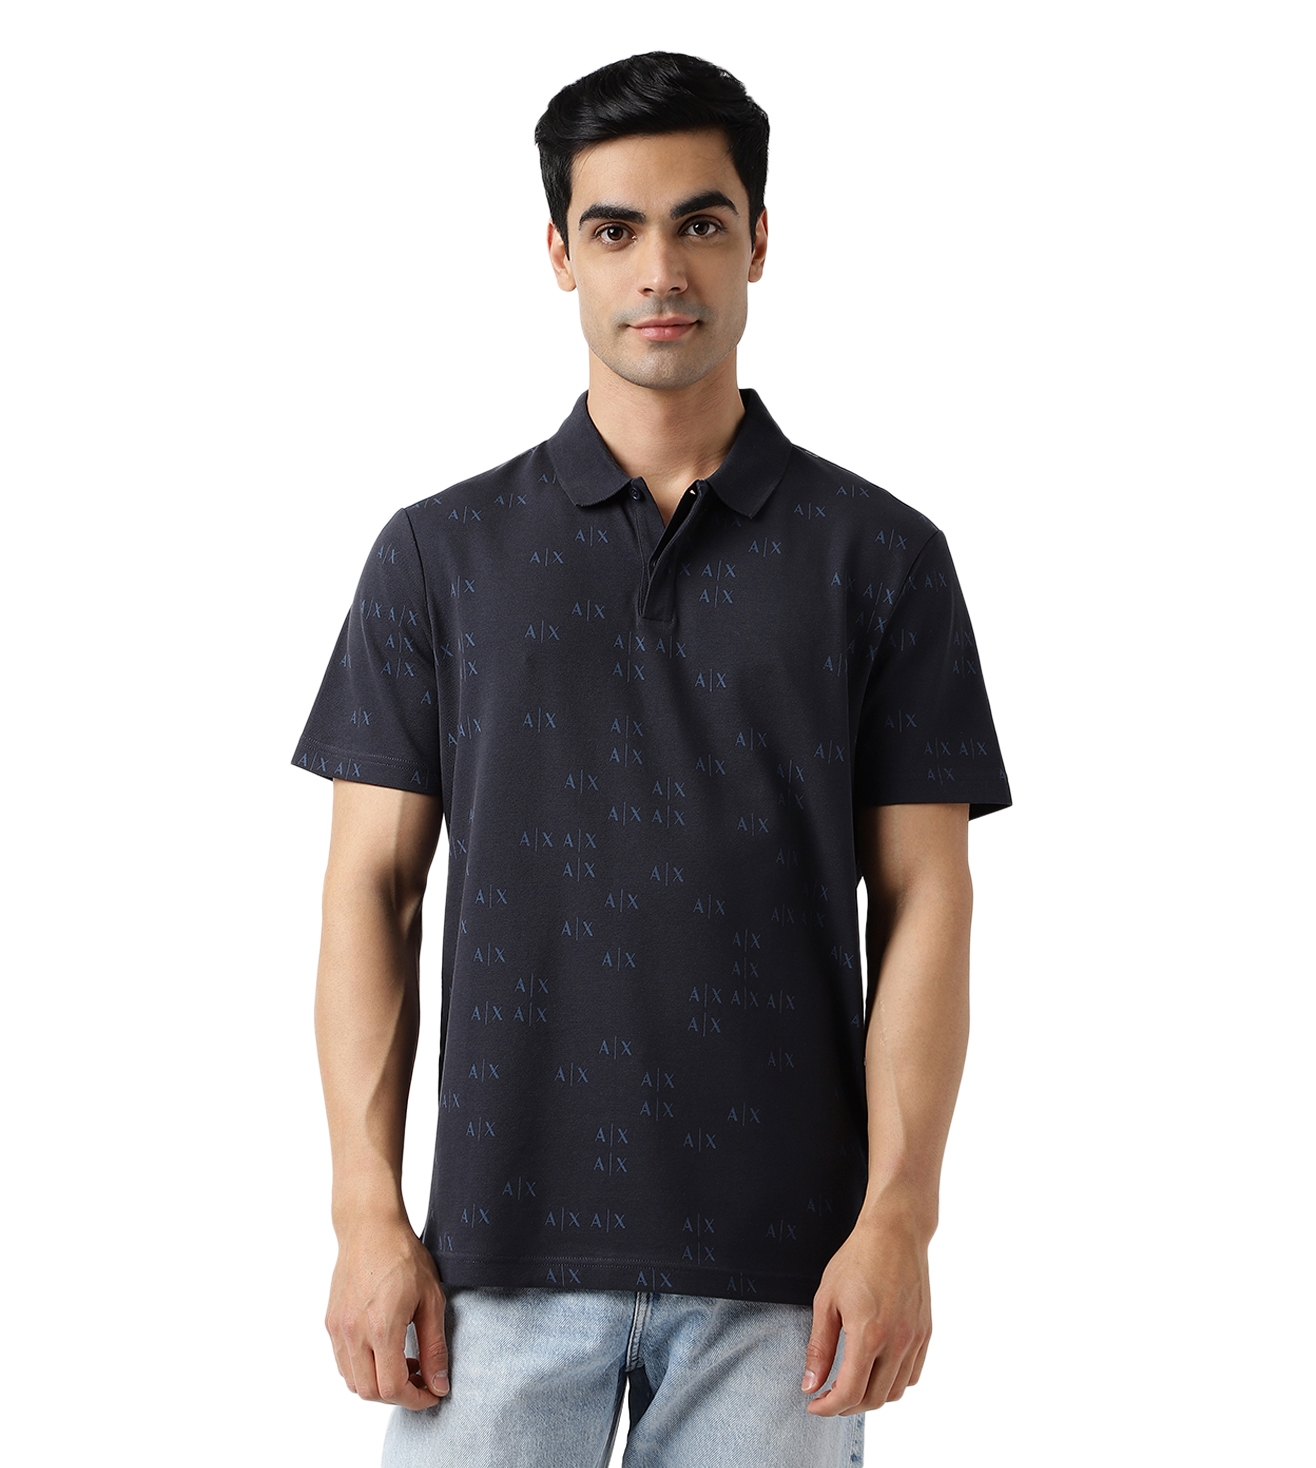 Lacoste T-Shirts - Buy 100% Original Lacoste Tshirt Online at Myntra.